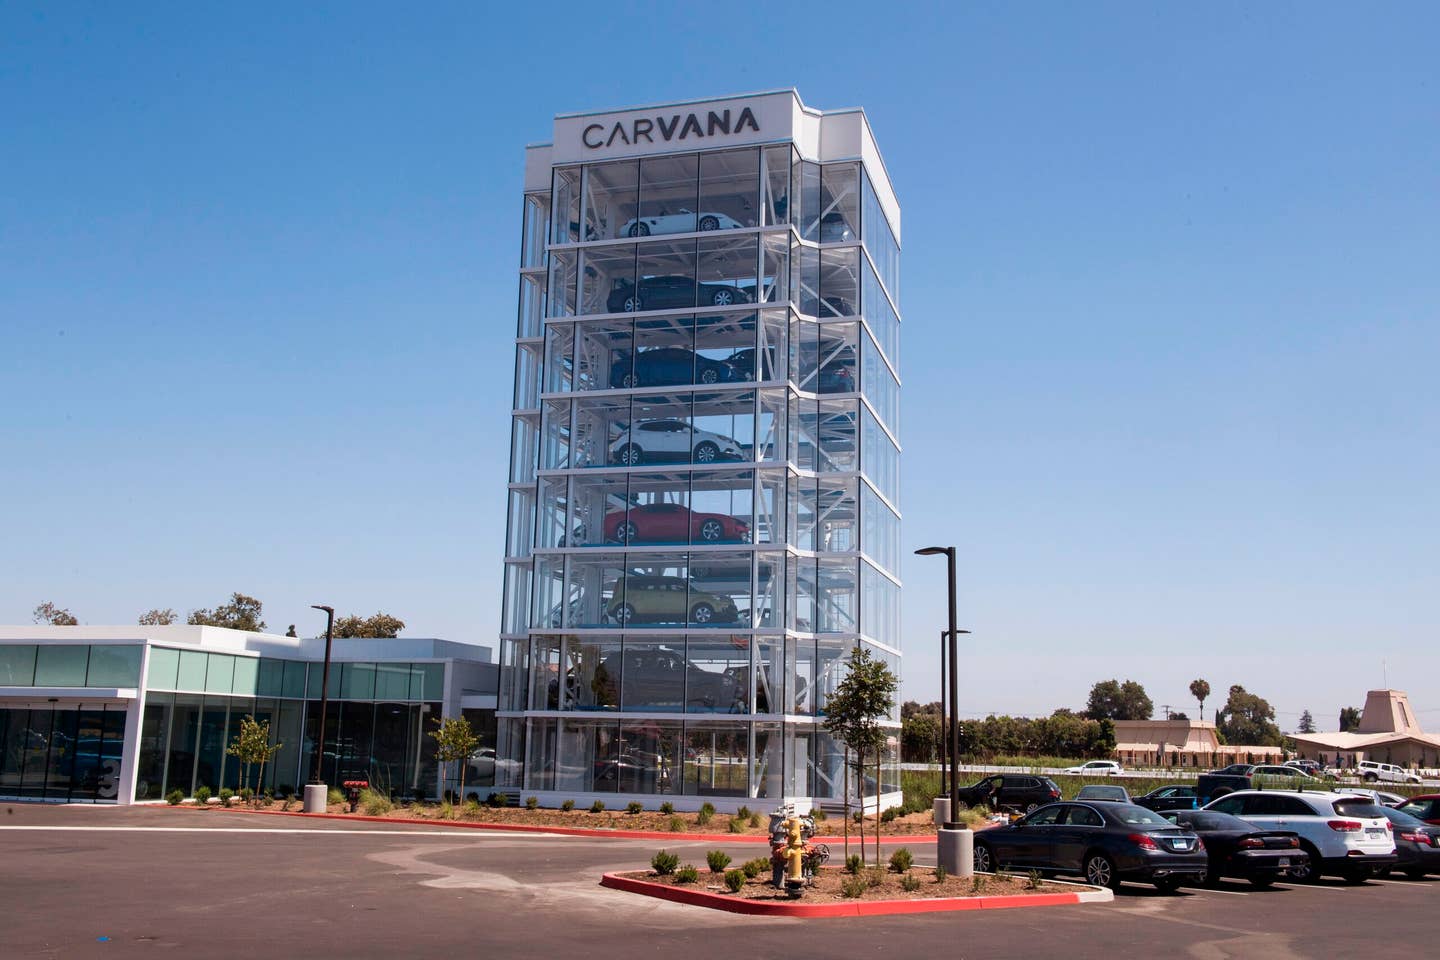 An eight story car vending machine, operated by the online used car dealer Carvana, that dispenses purchased cars to customers is seen in Huntington Beach, California on August 16, 2019. - The fully automated, special coin-operated Car Vending Machine holds up to 30 vehicles and the company says it offers a novel pick-up experience for cars purchased on their website. (Photo by Mark RALSTON / AFP)        (Photo credit should read MARK RALSTON/AFP via Getty Images)